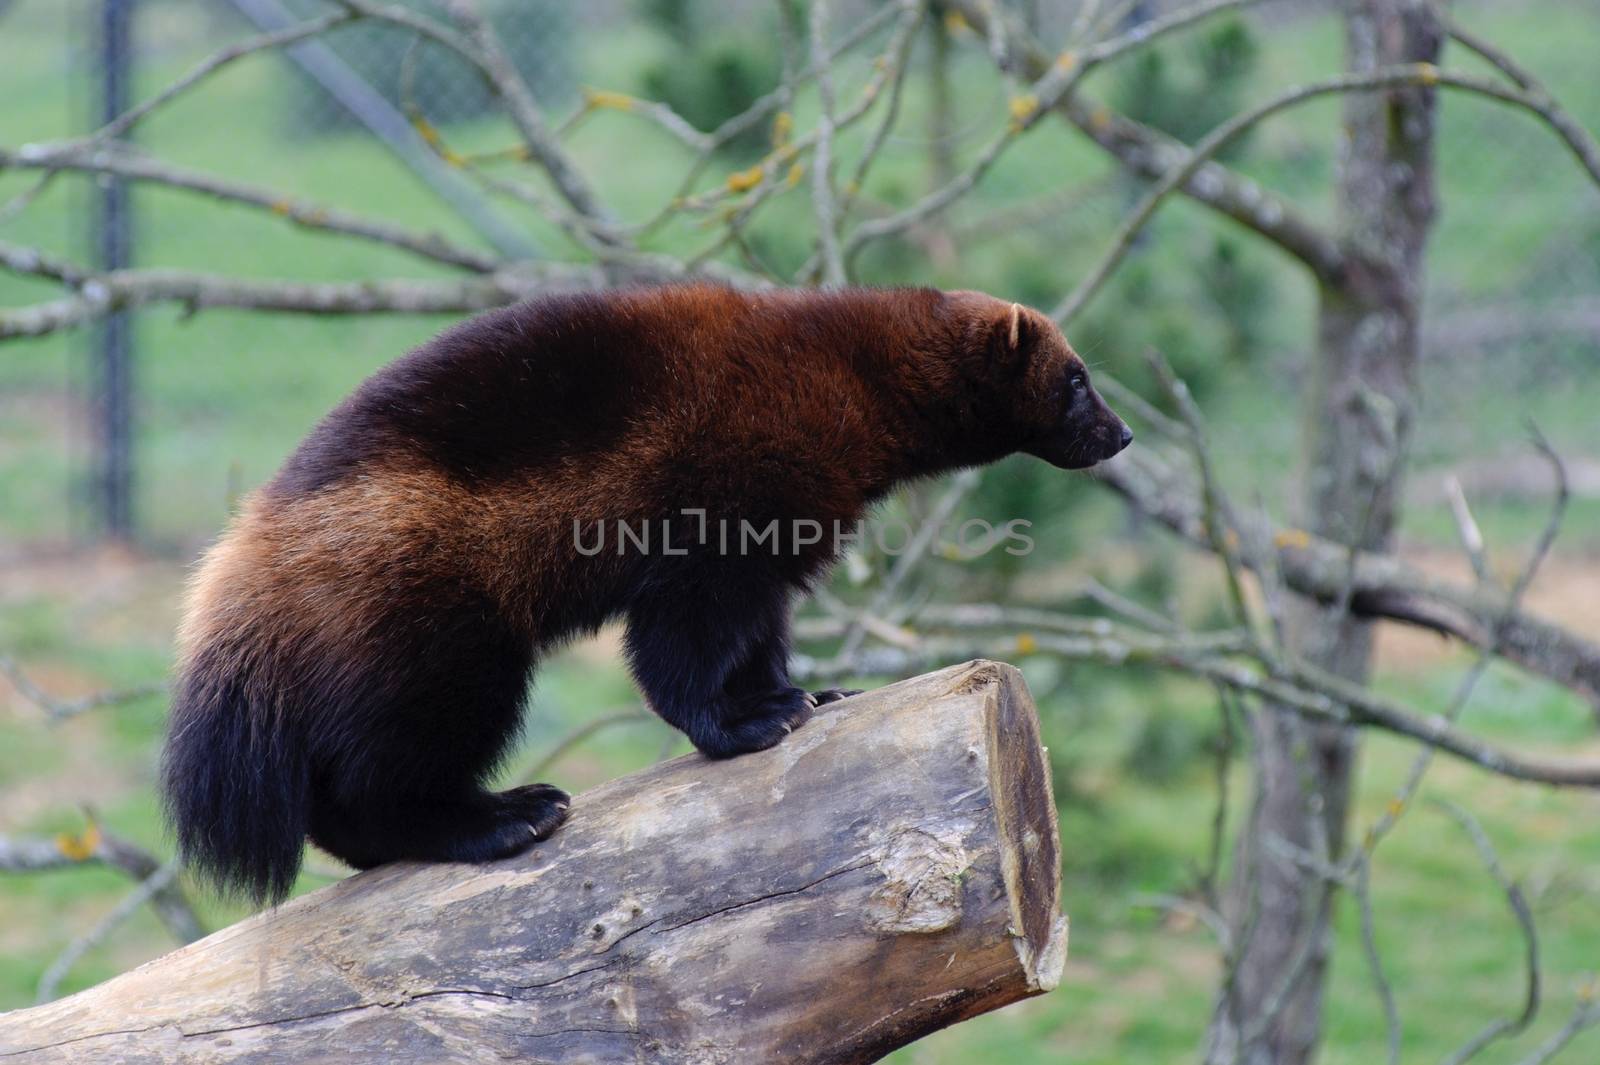 Wolverine standing on log with blurred background